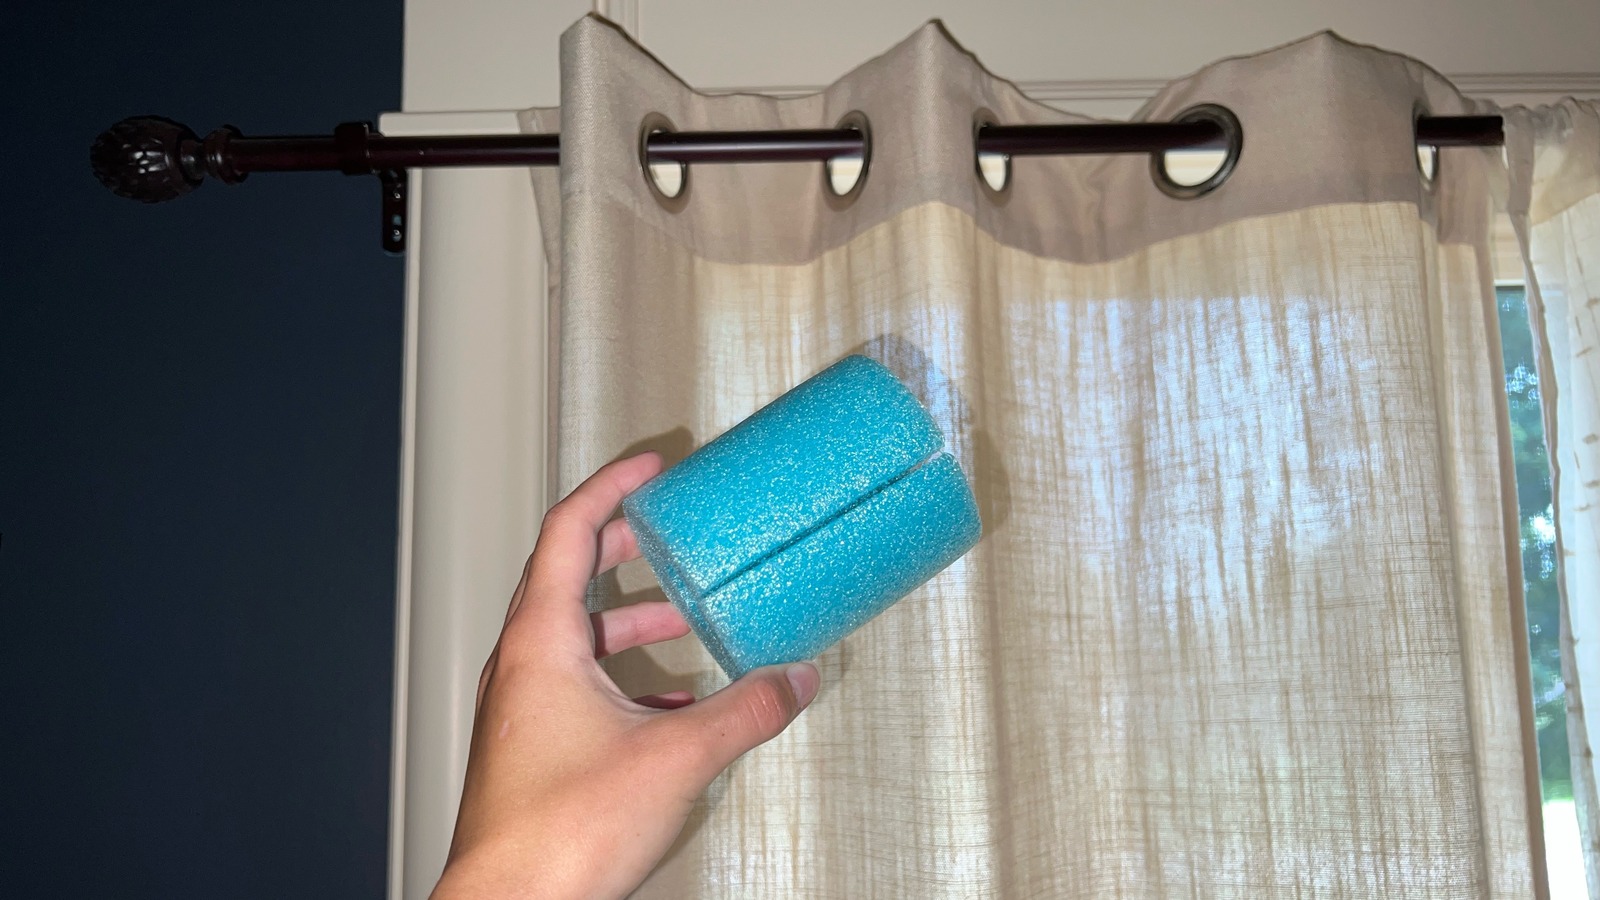 We Tried The Pool Noodle Hack For Neat Curtain Pleats And The Results ...